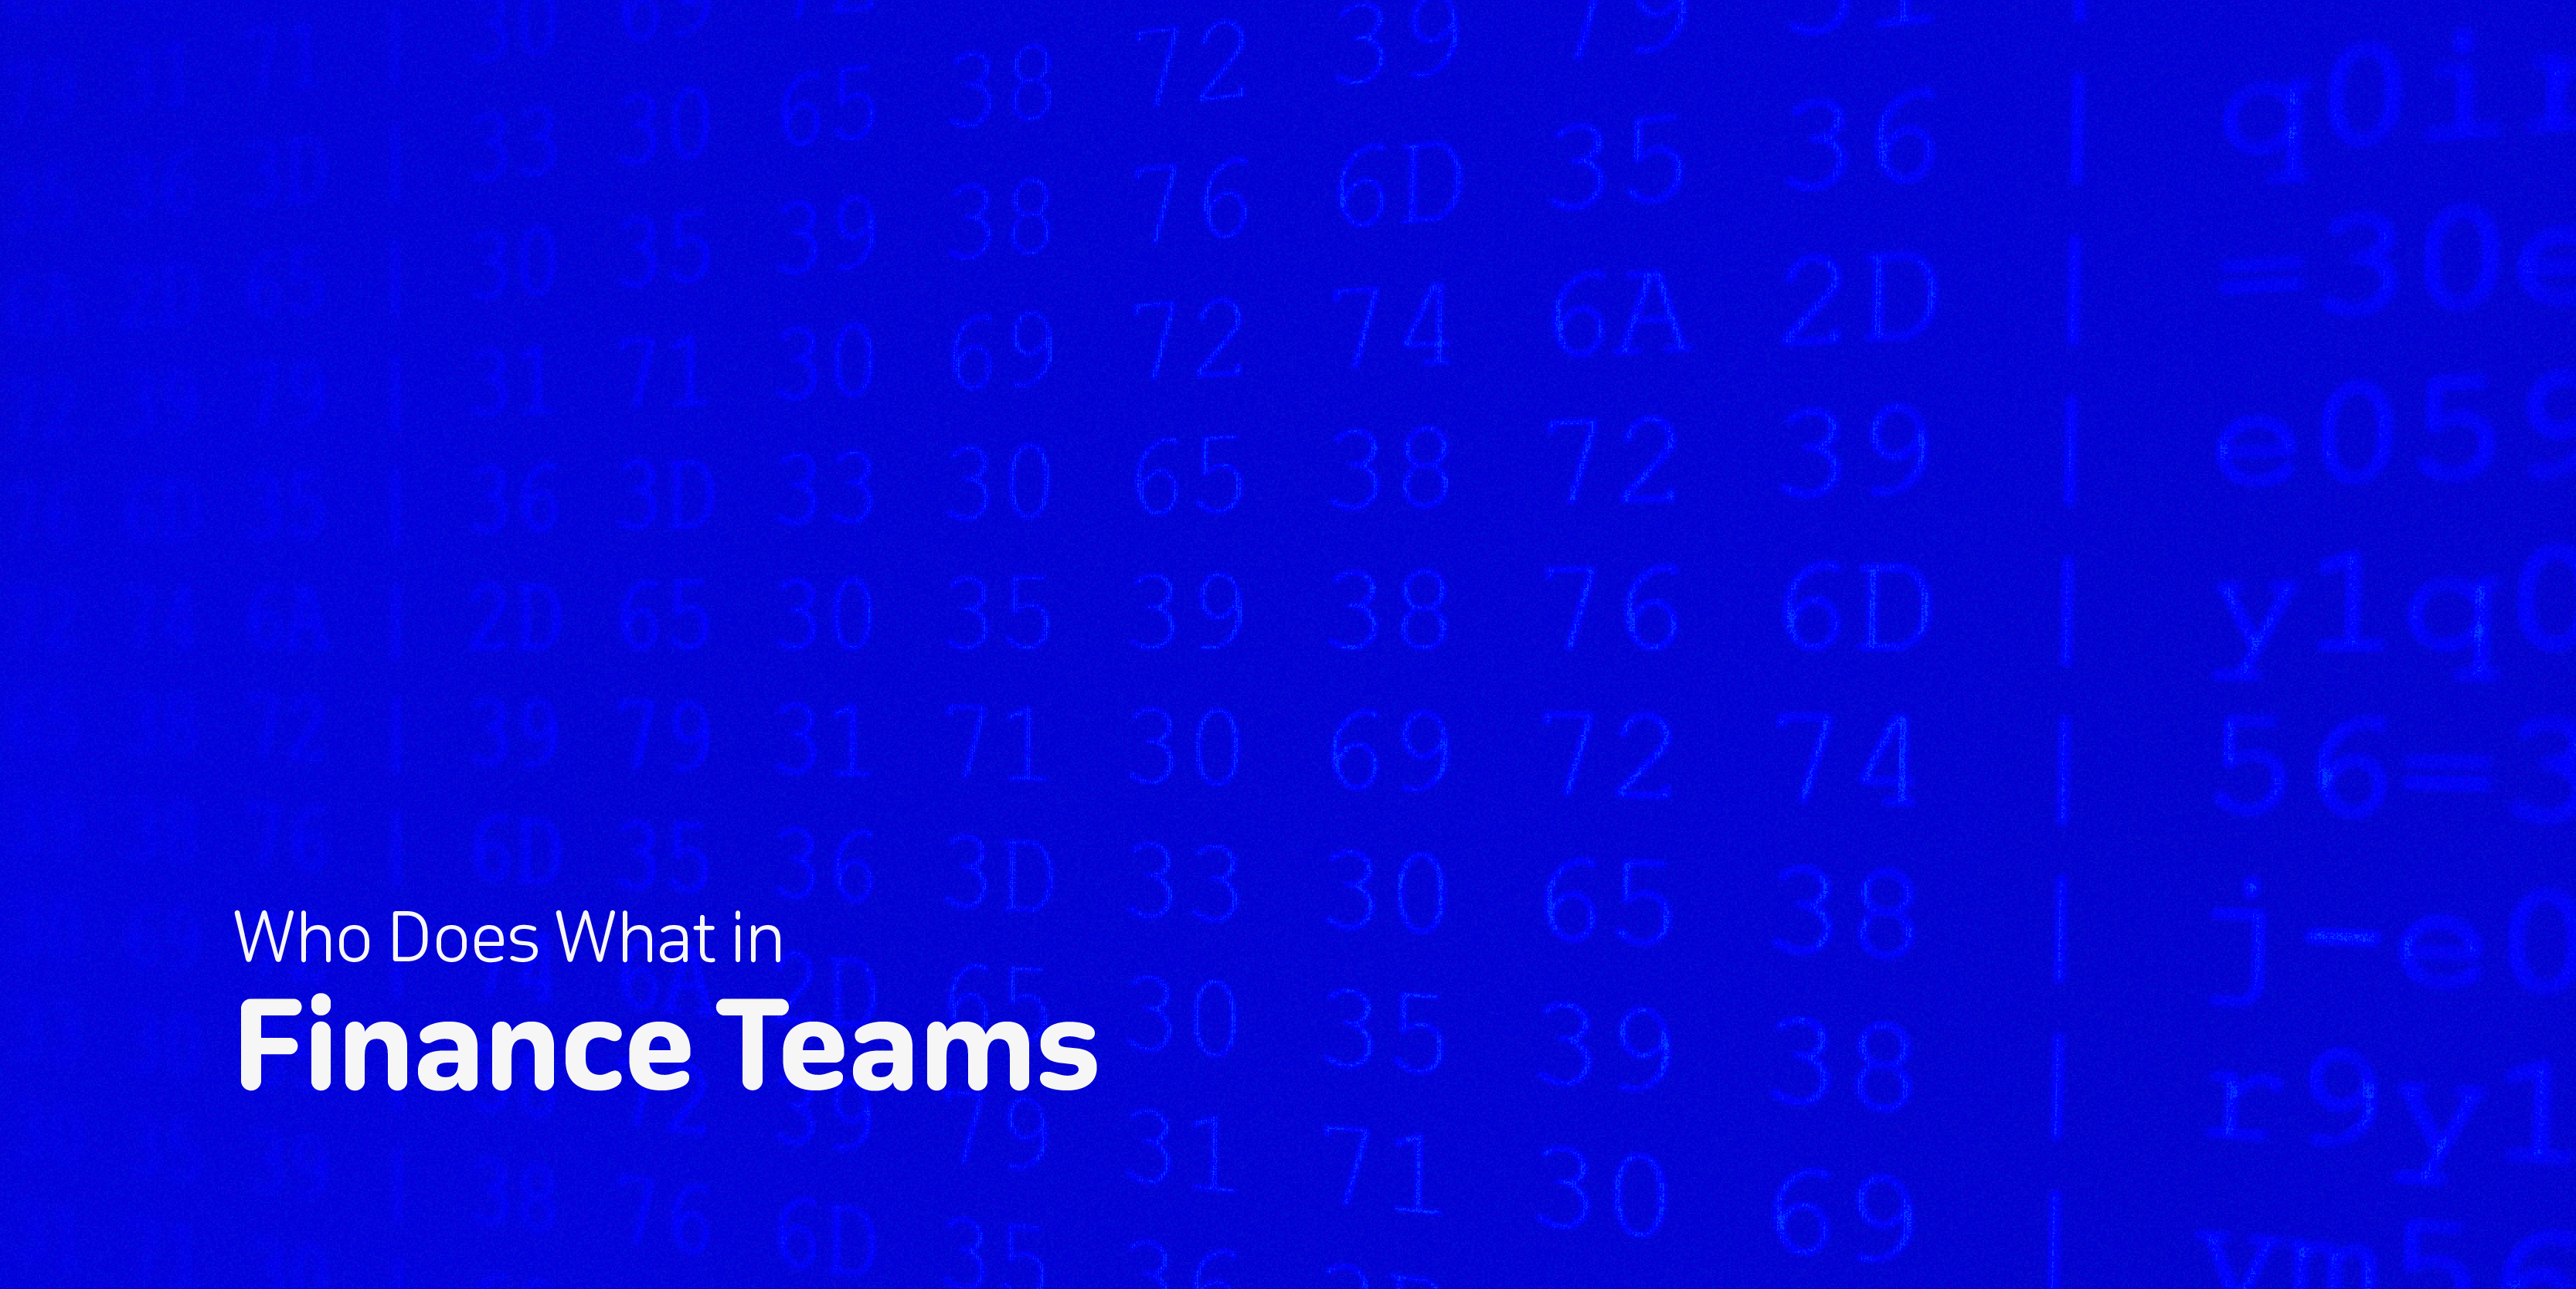 Blue Background "Who Does What in Finance Teams"